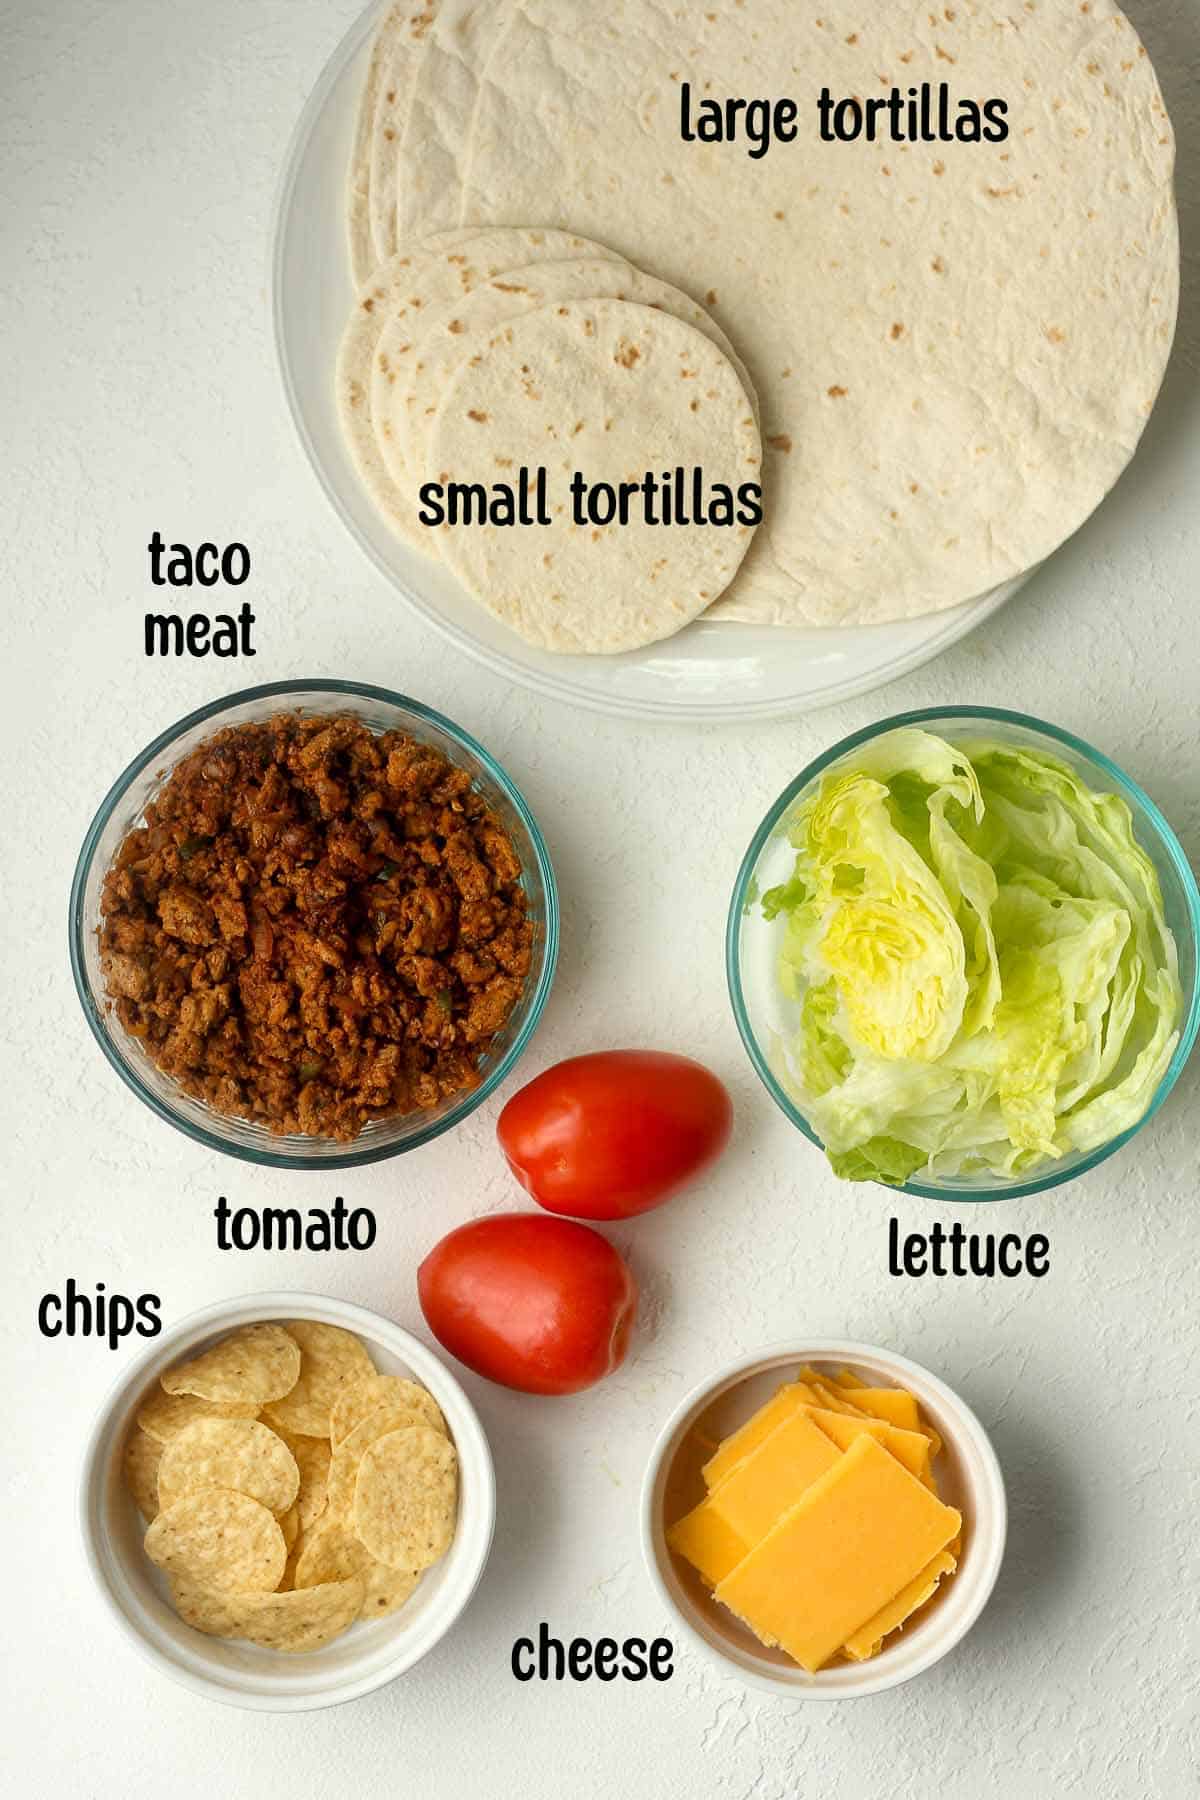 The ingredients for the taco crunch wraps.